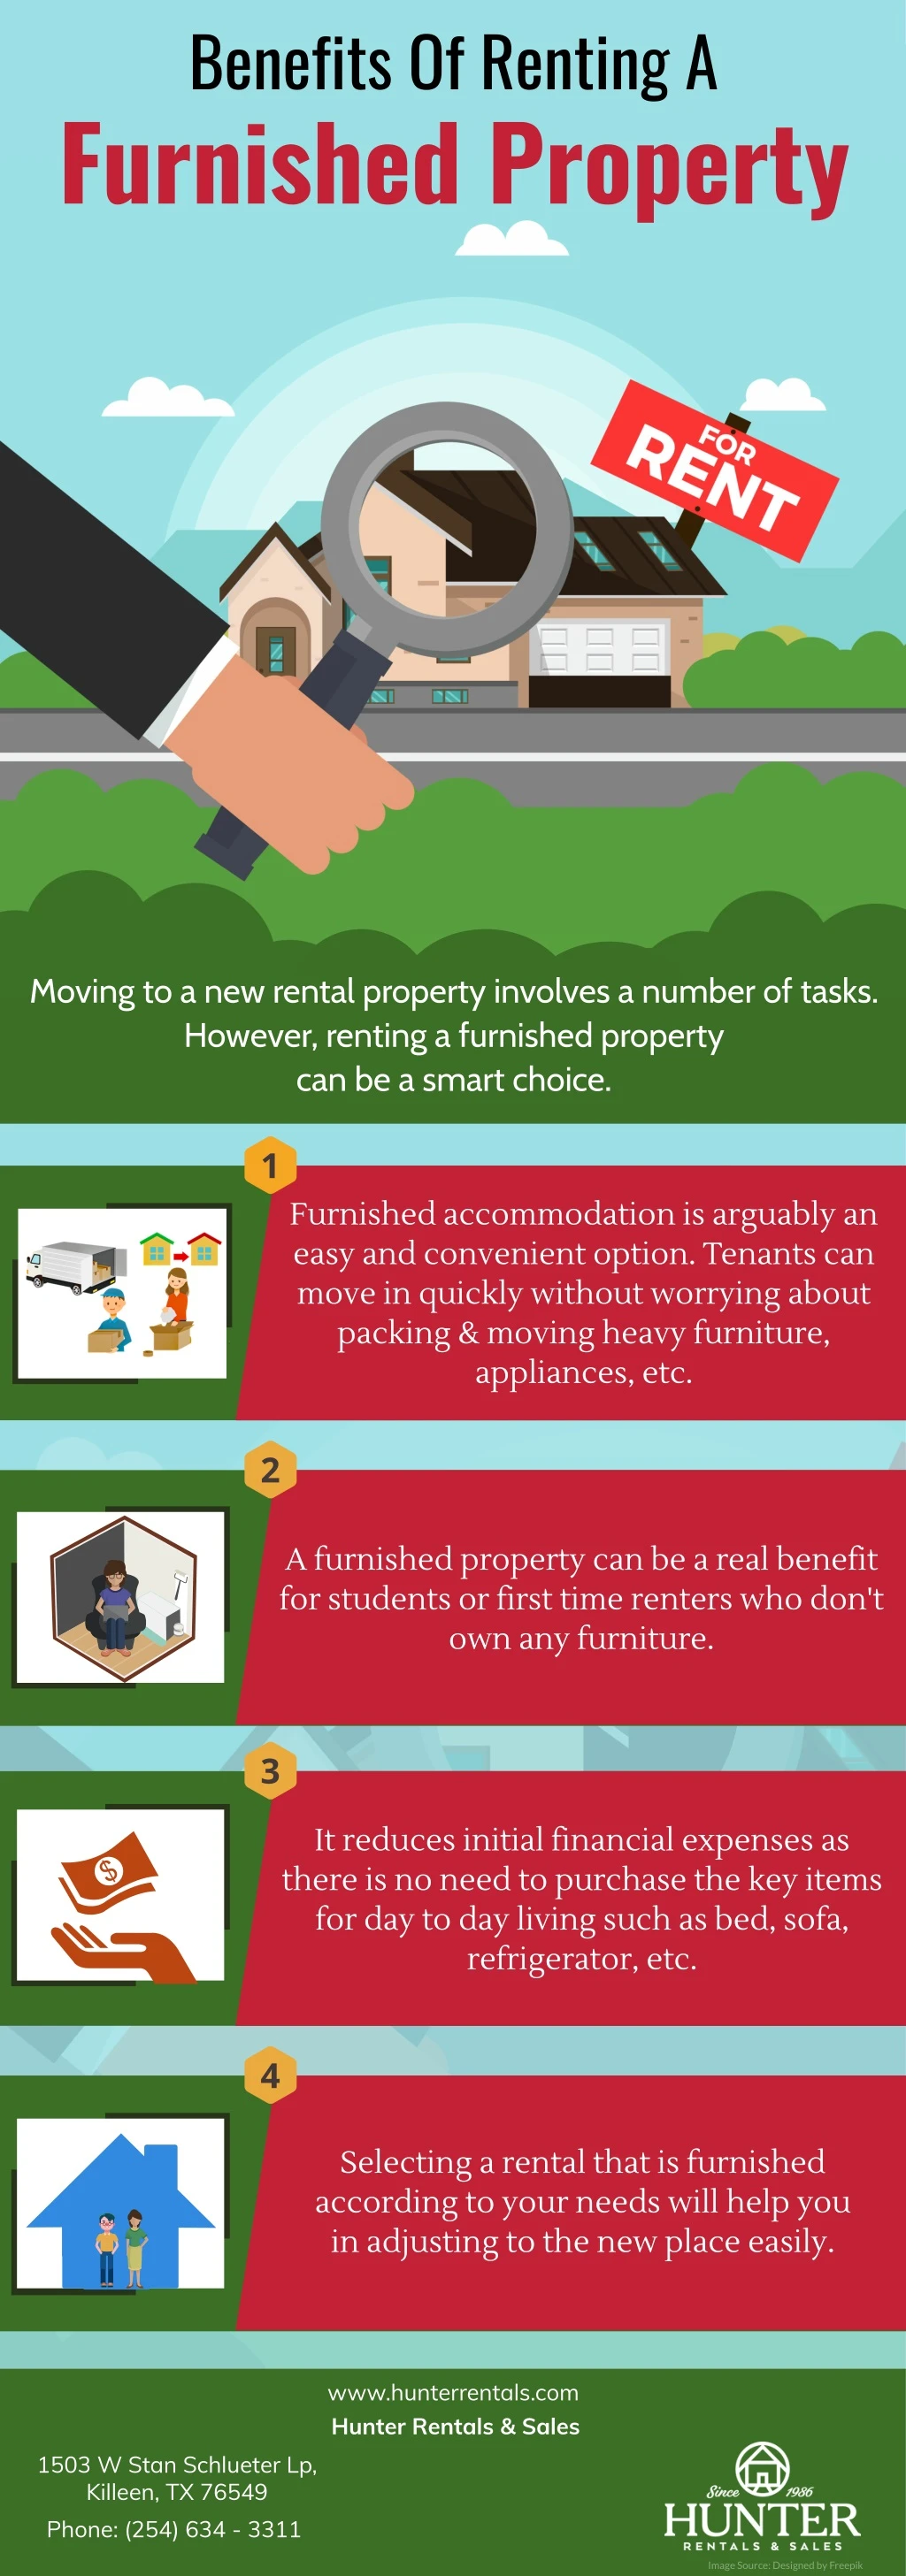 benefits of renting a furnished property